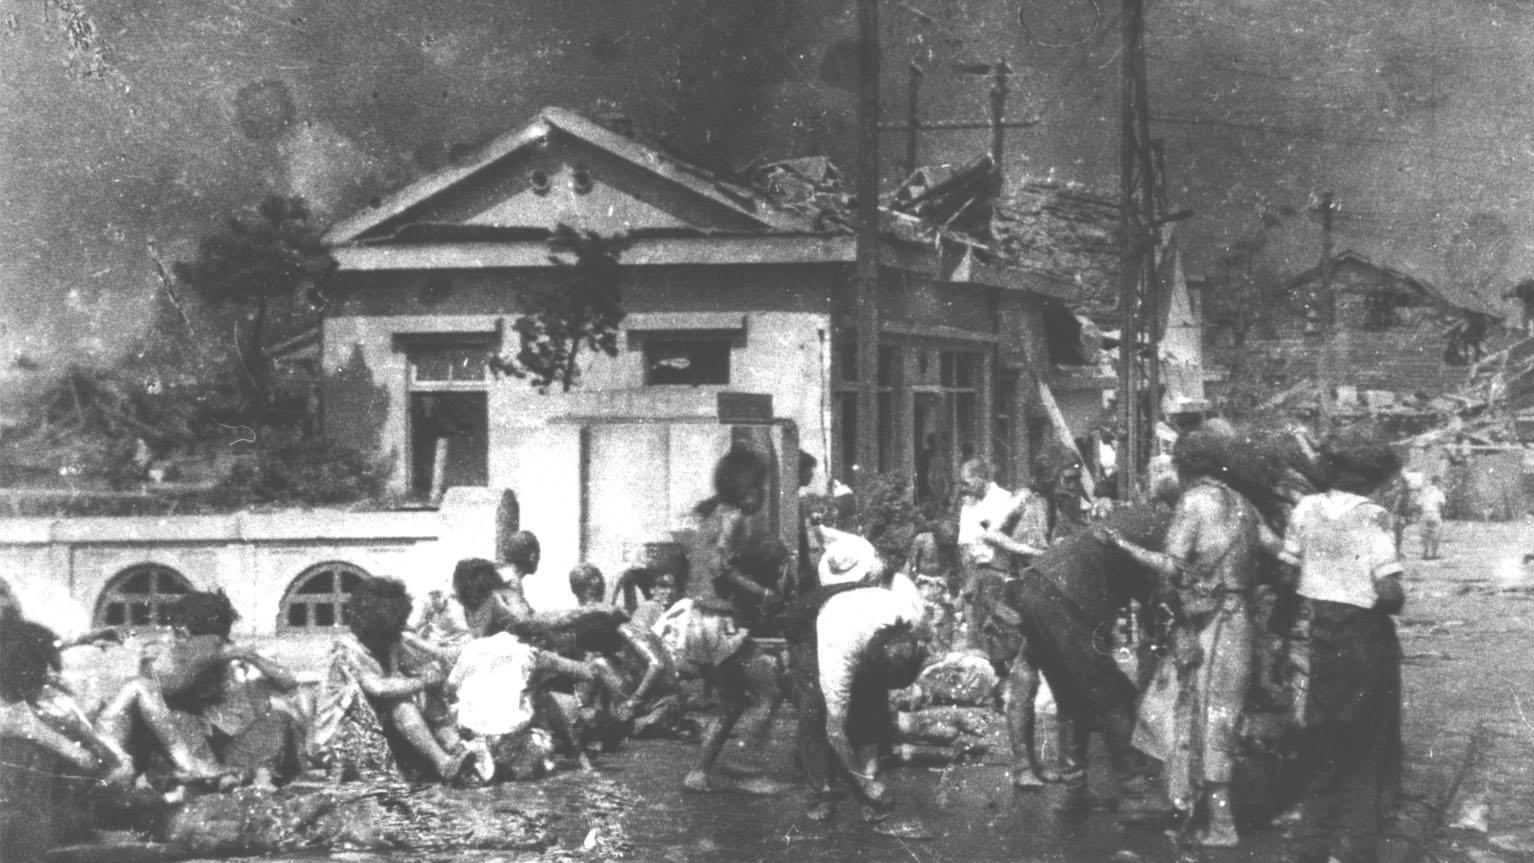 A crowd of survivors are shown standing and sitting on a bridge with several damaged buildings in the distance.